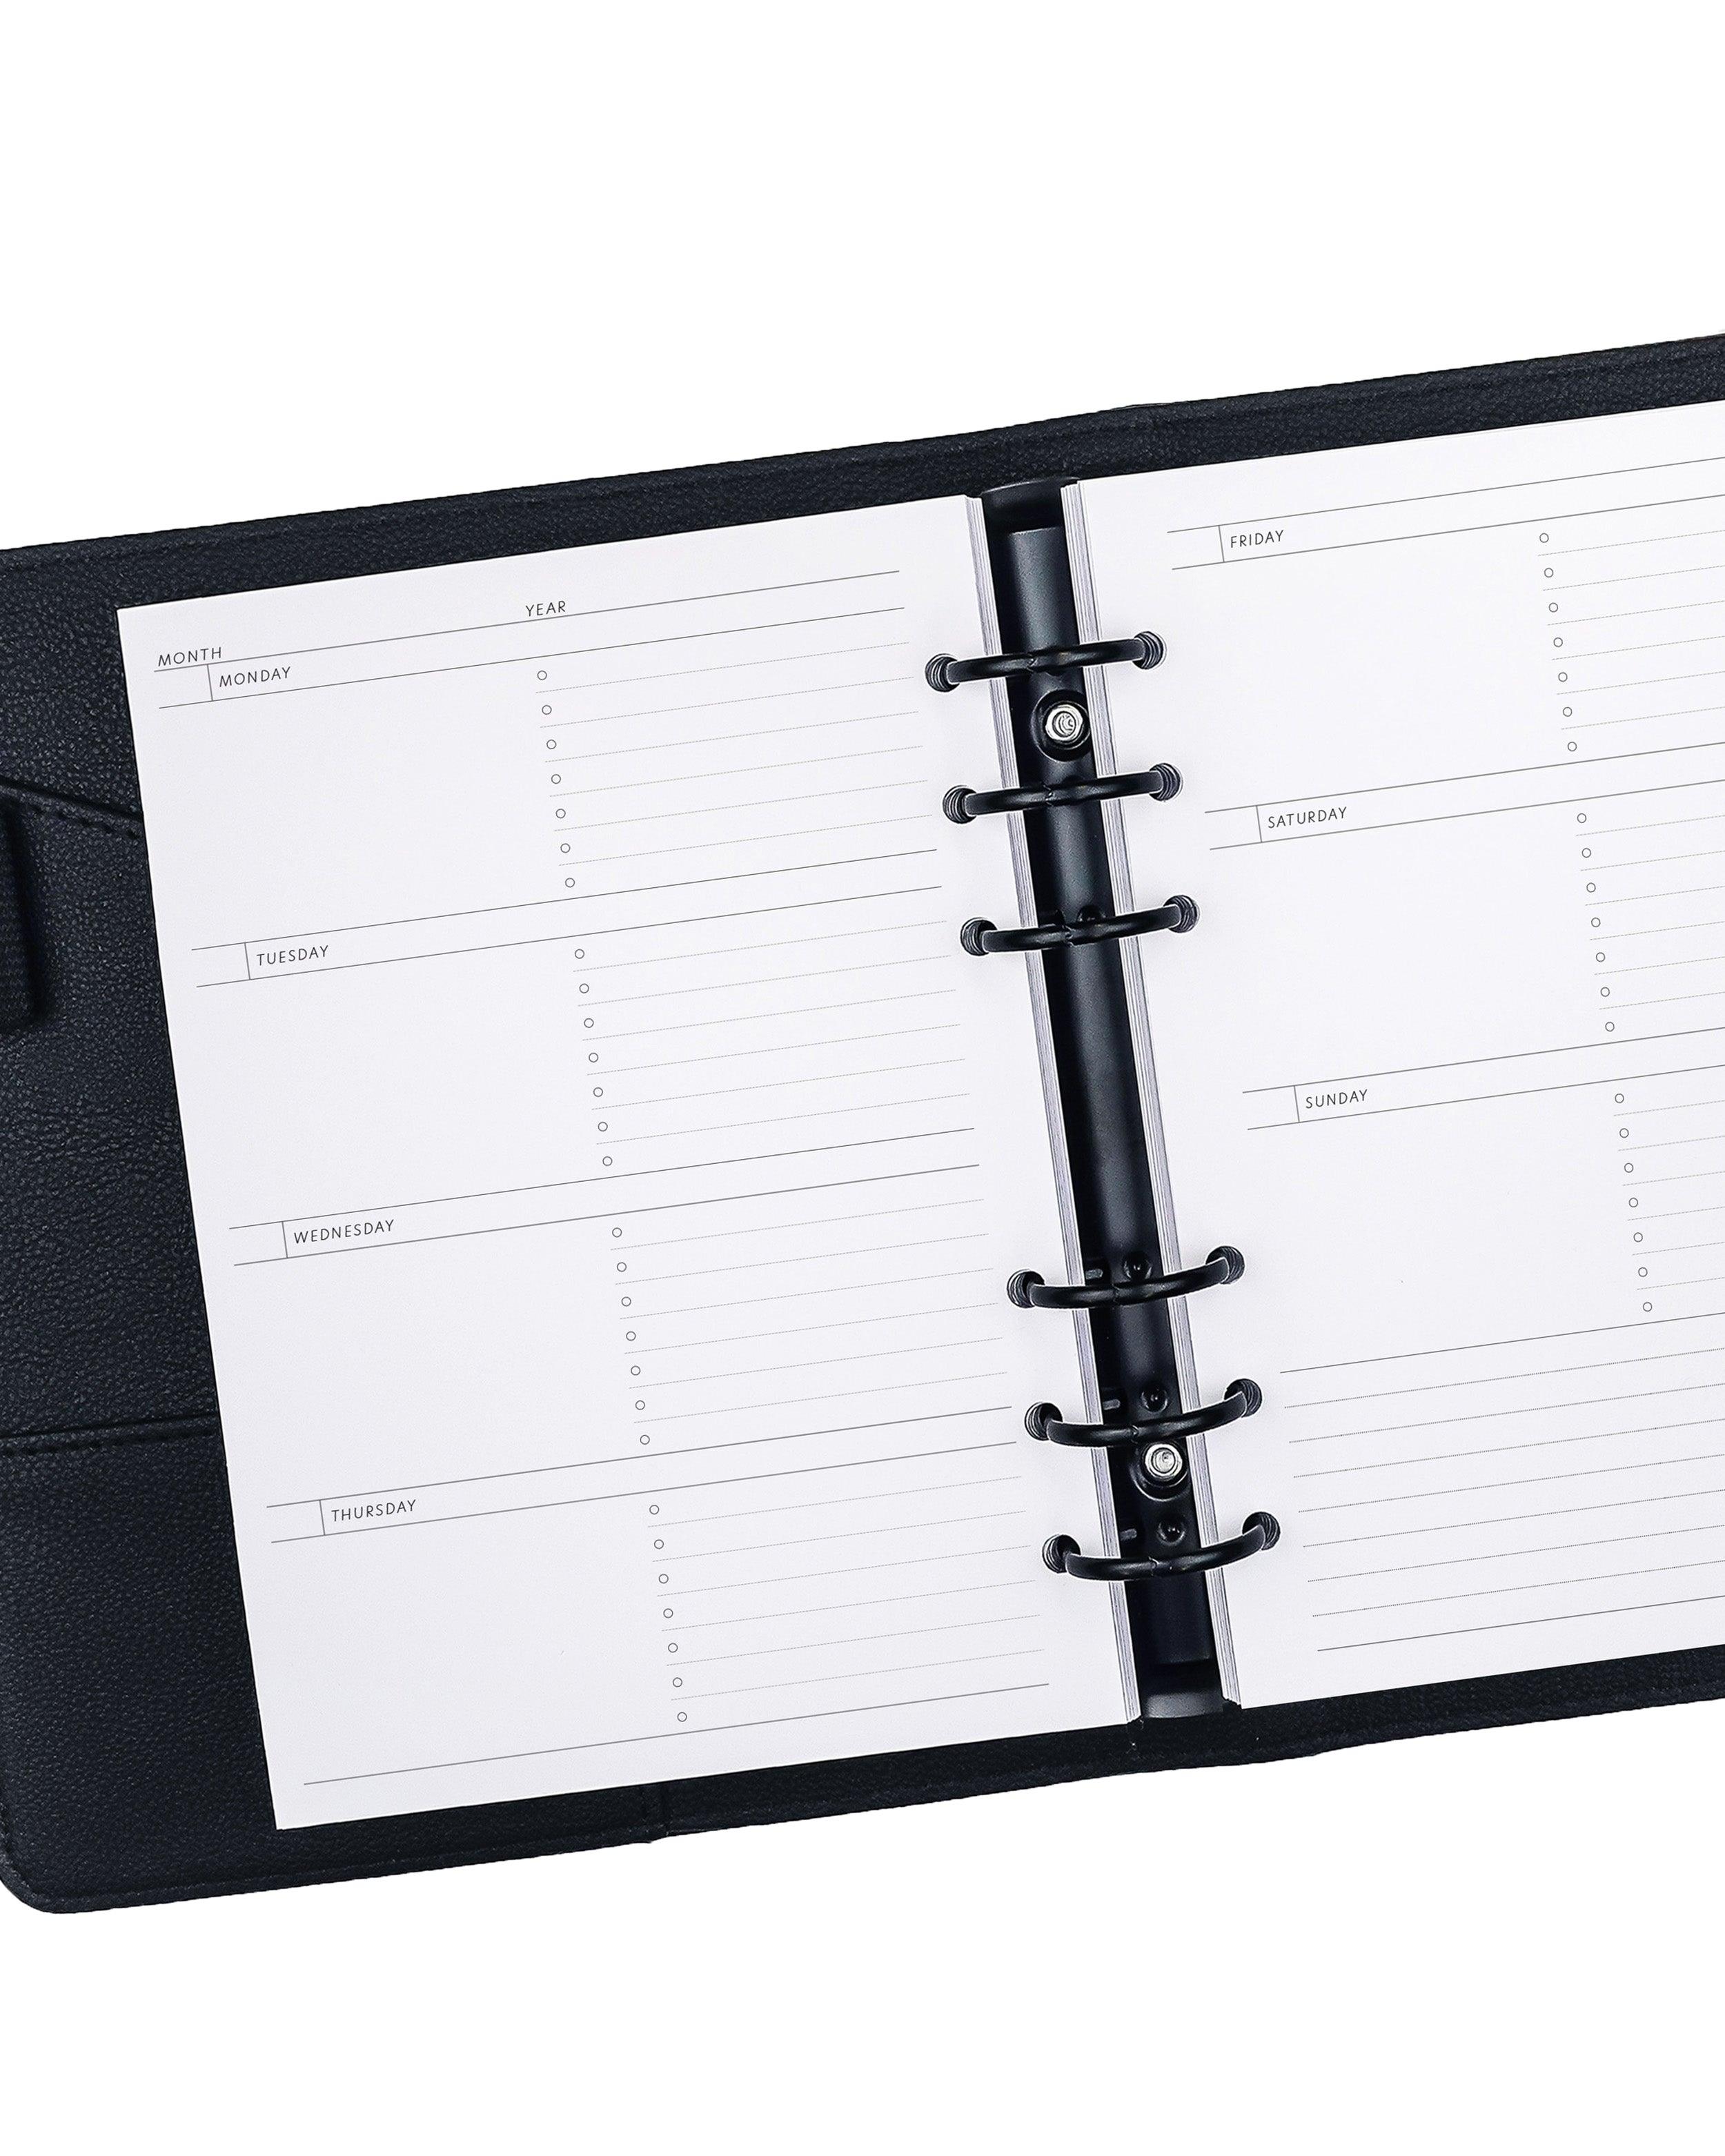 Weekly calendar planner inserts and refill pages for discbound and six ring planner systems by Janes Agenda.